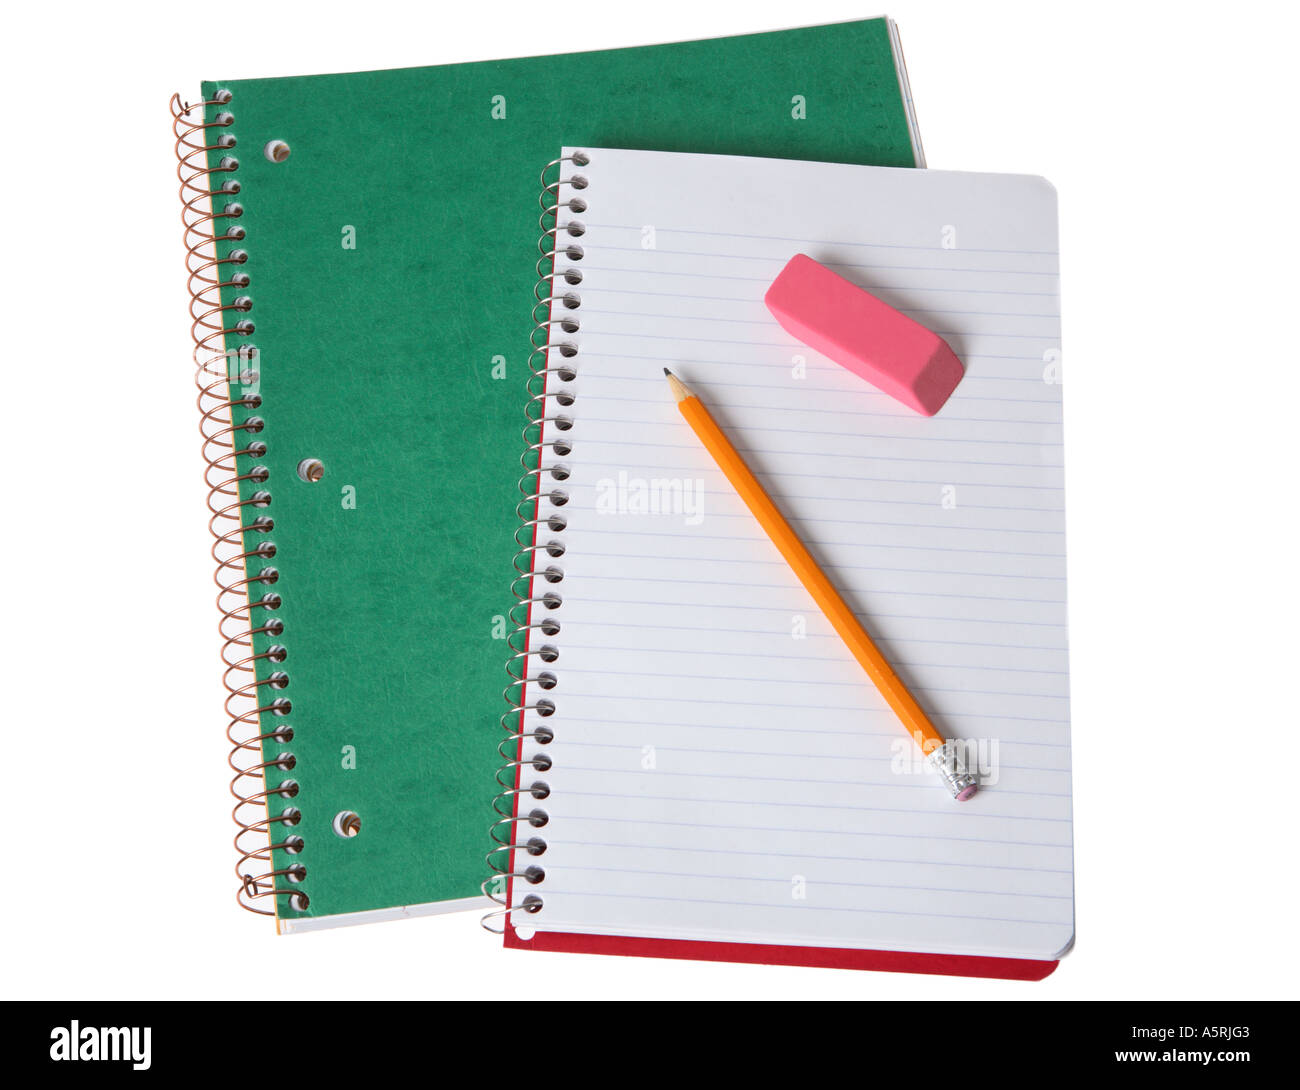 School notebooks with pencil and eraser on open blank page. Stock Photo